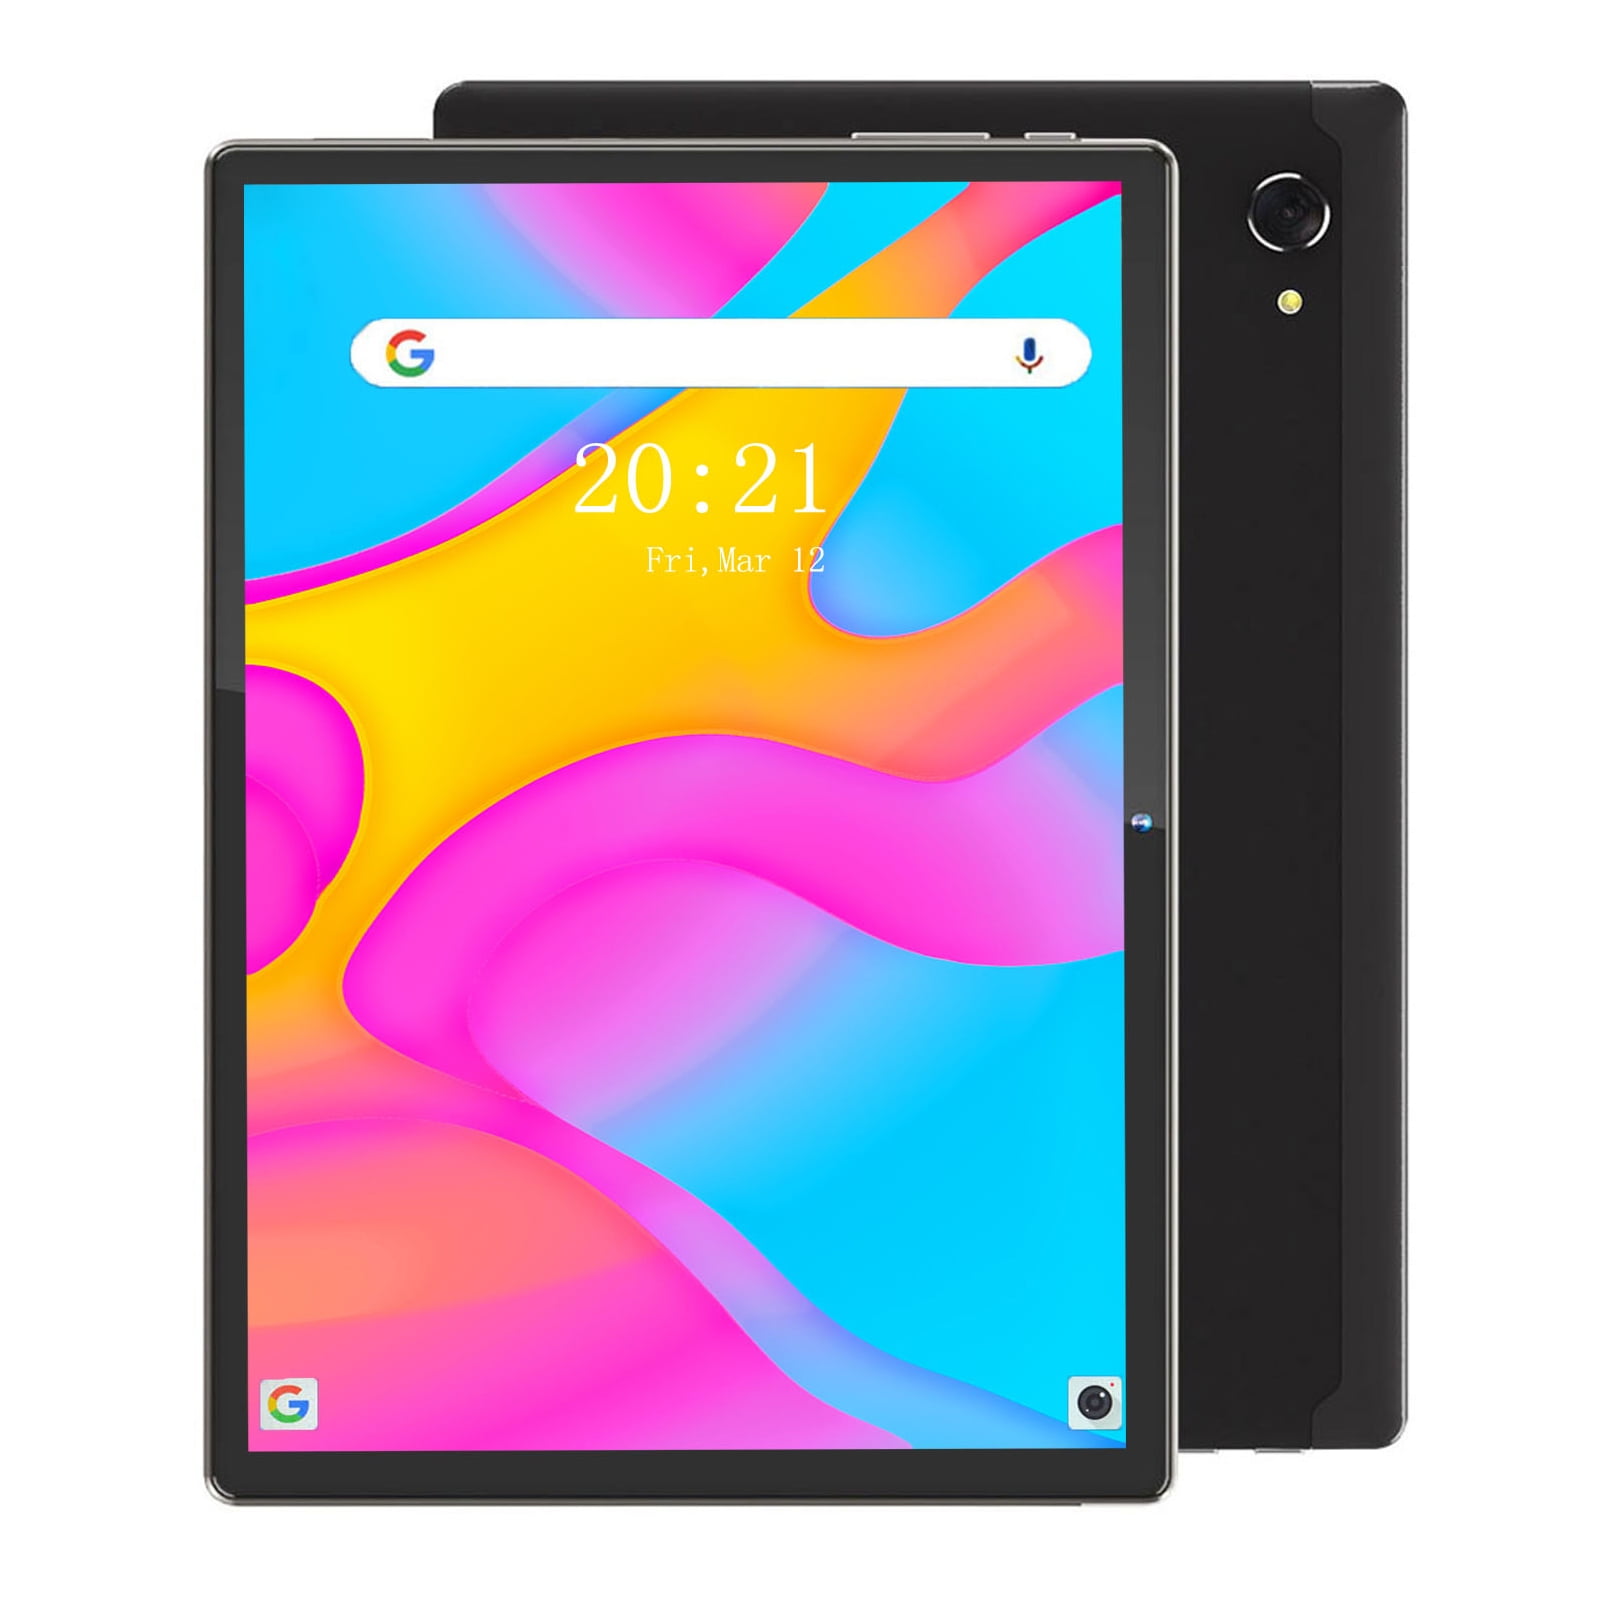 MARVUE Pad M30 Tablet, 10.1 Inch 1920x1200 IPS FHD, Android 10, 3 